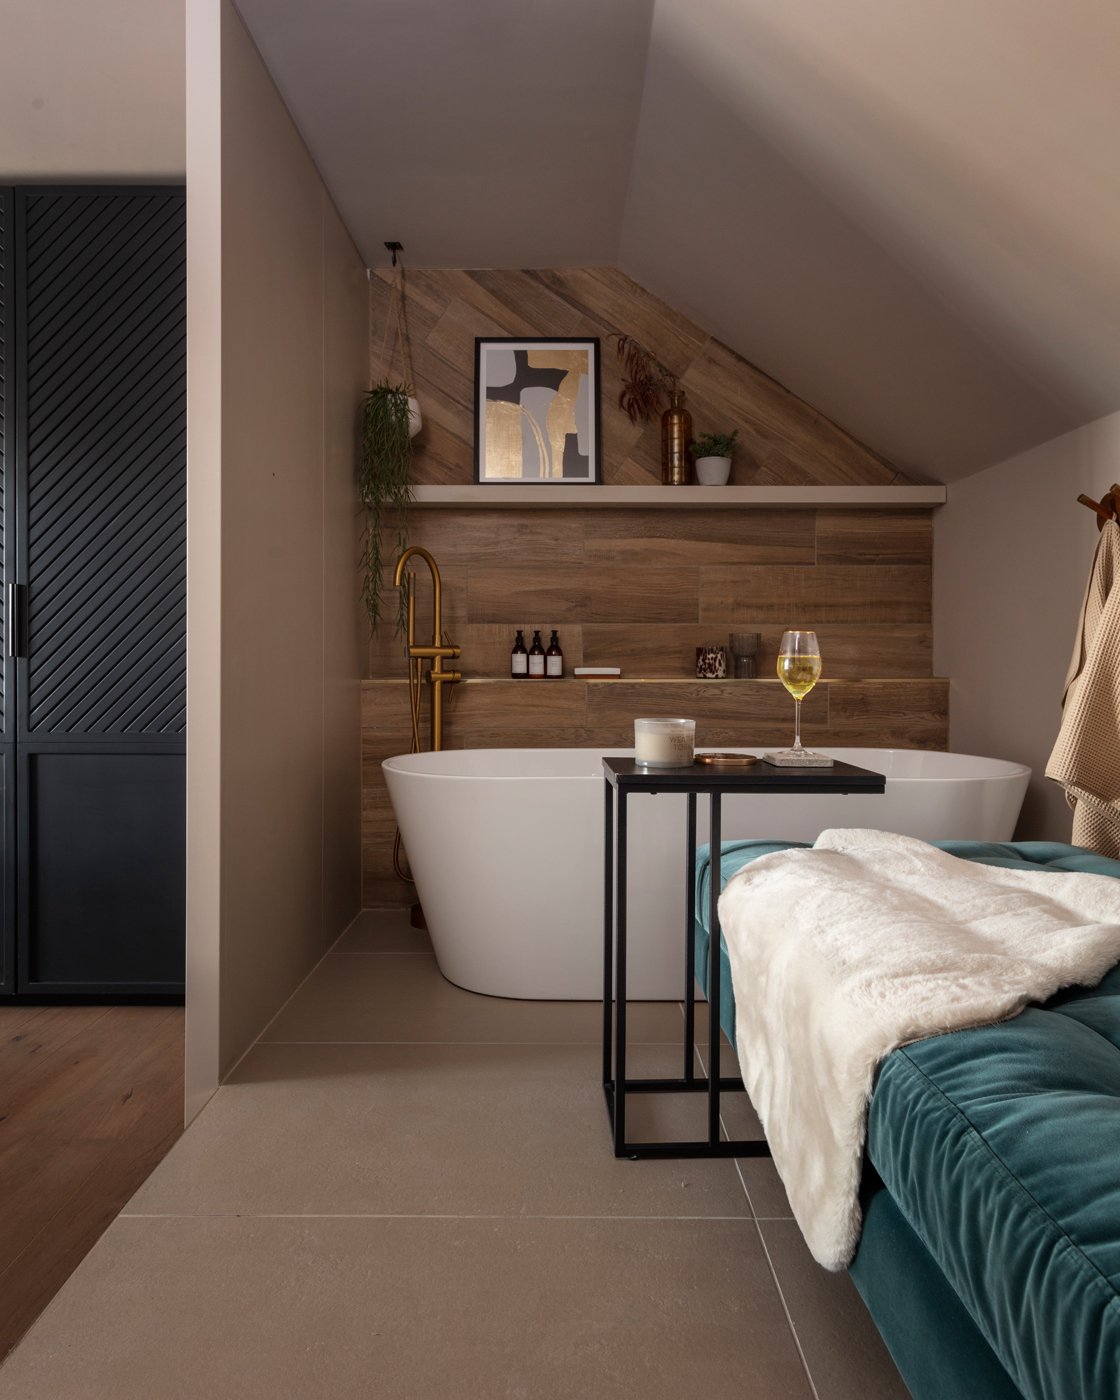 open plan bedroom and bath, wooden floor and wall covering, newcastle, northumberland, renovation.jpg